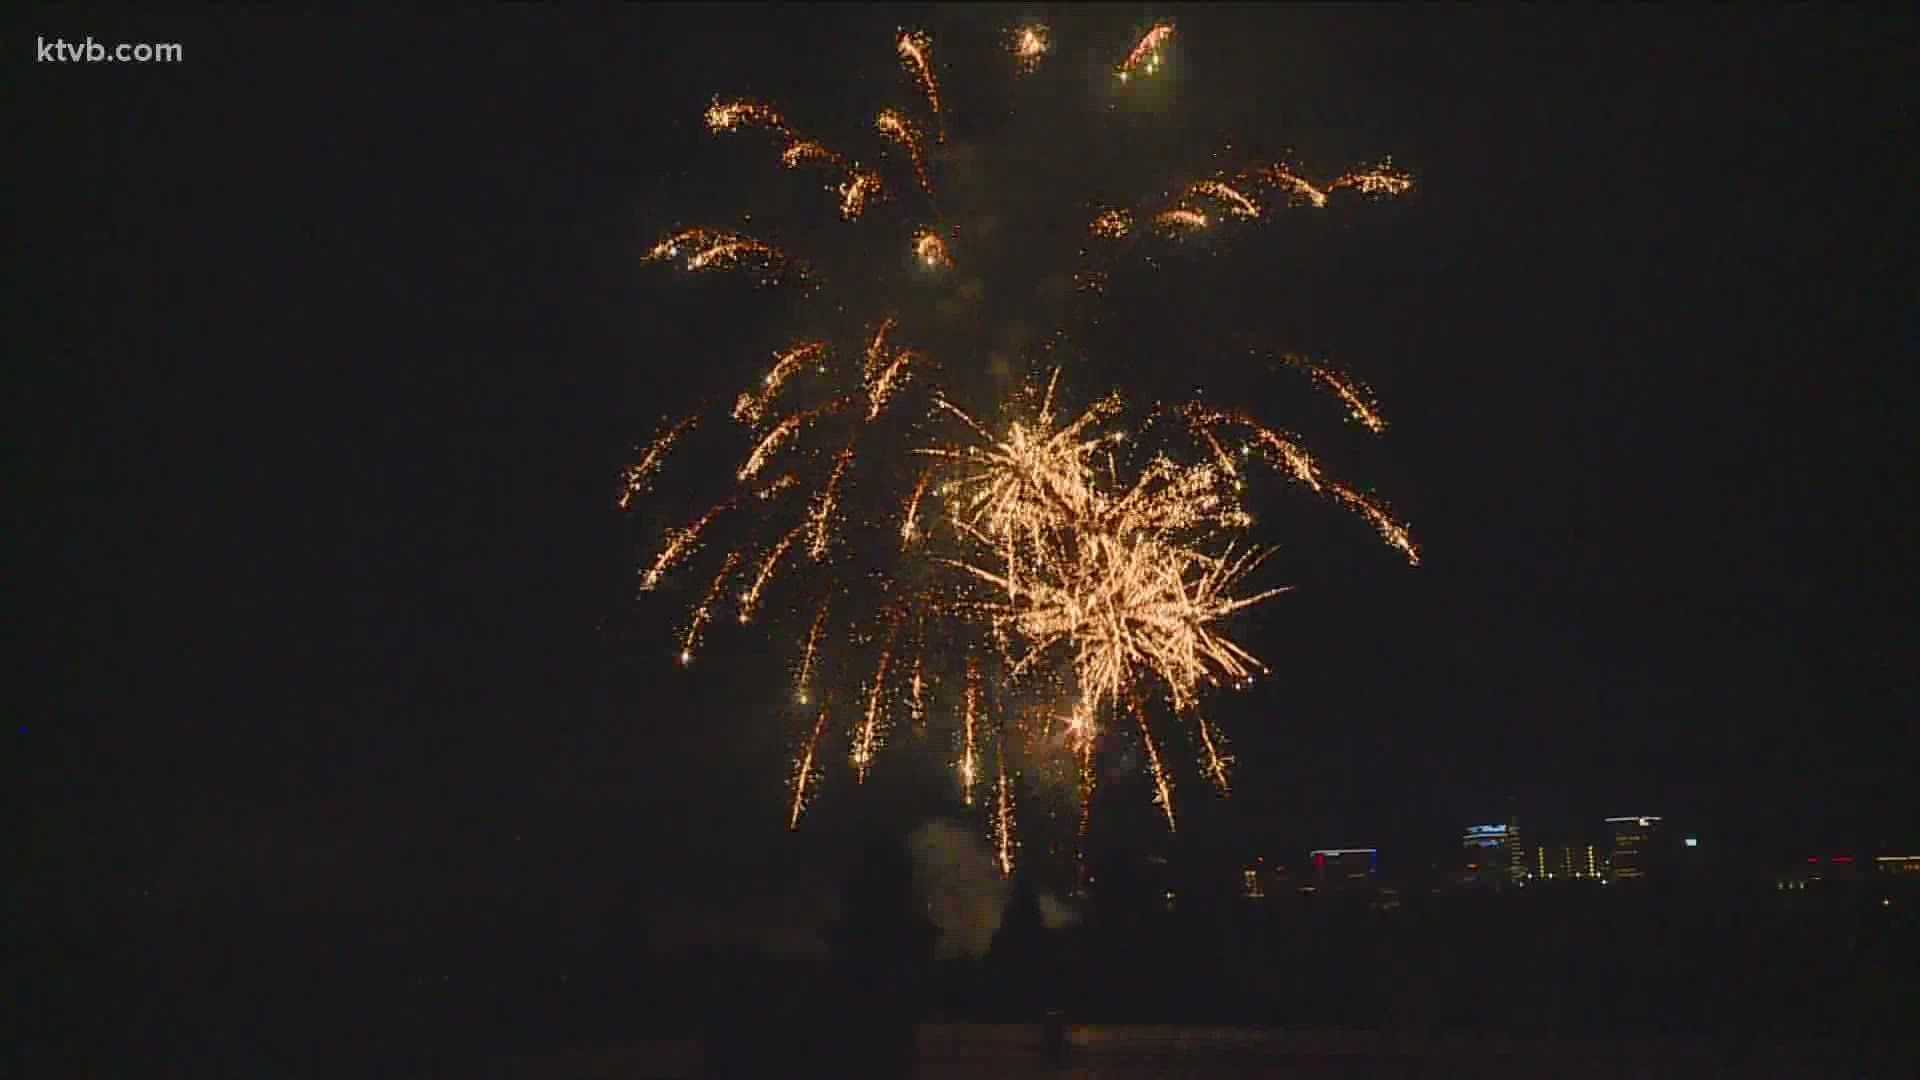 Boise mayor announces 4th of July fireworks display on for 2021